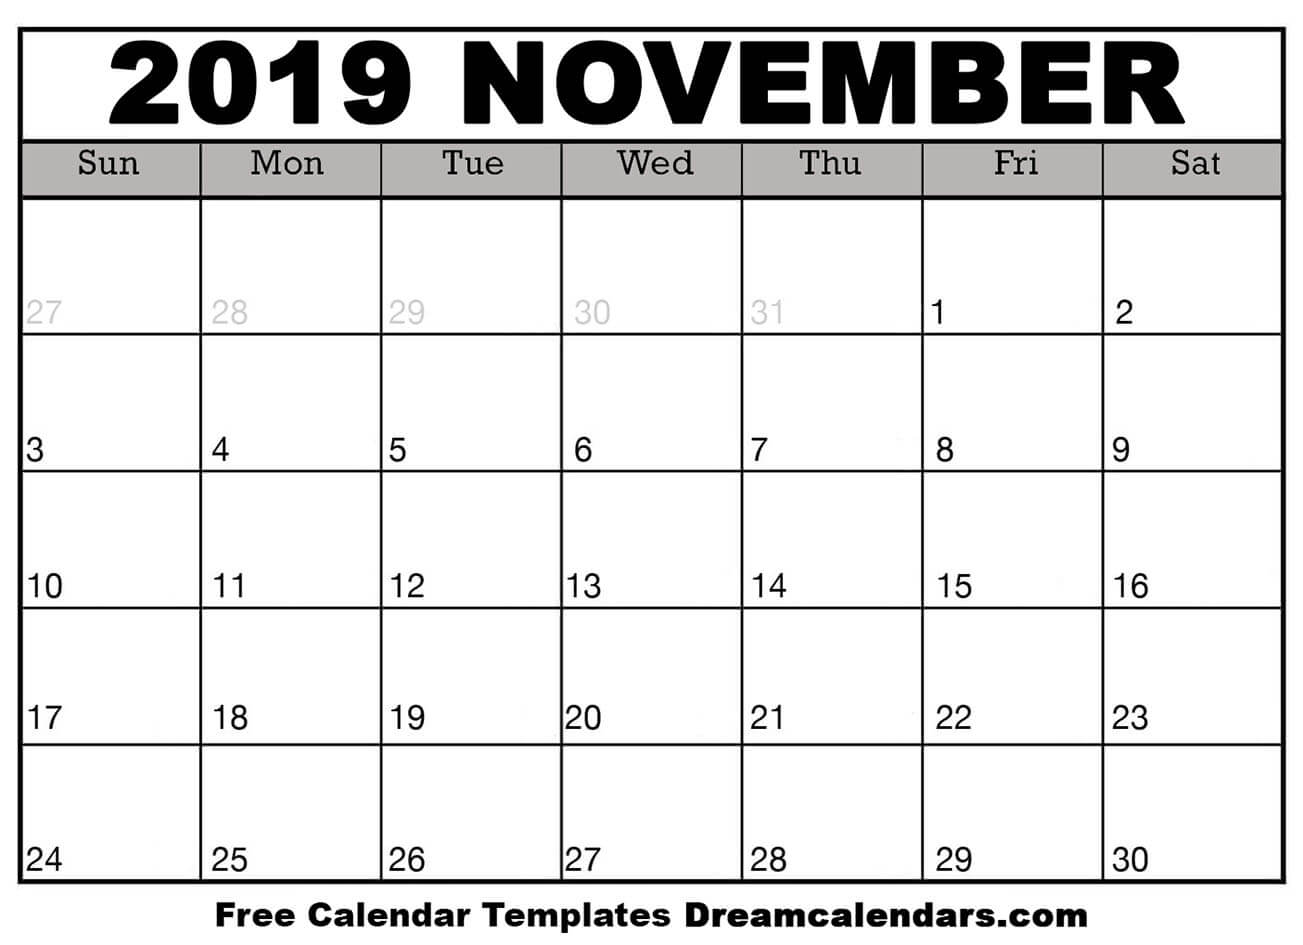 November 2019 Calendar Free Printable with Holidays and Observances